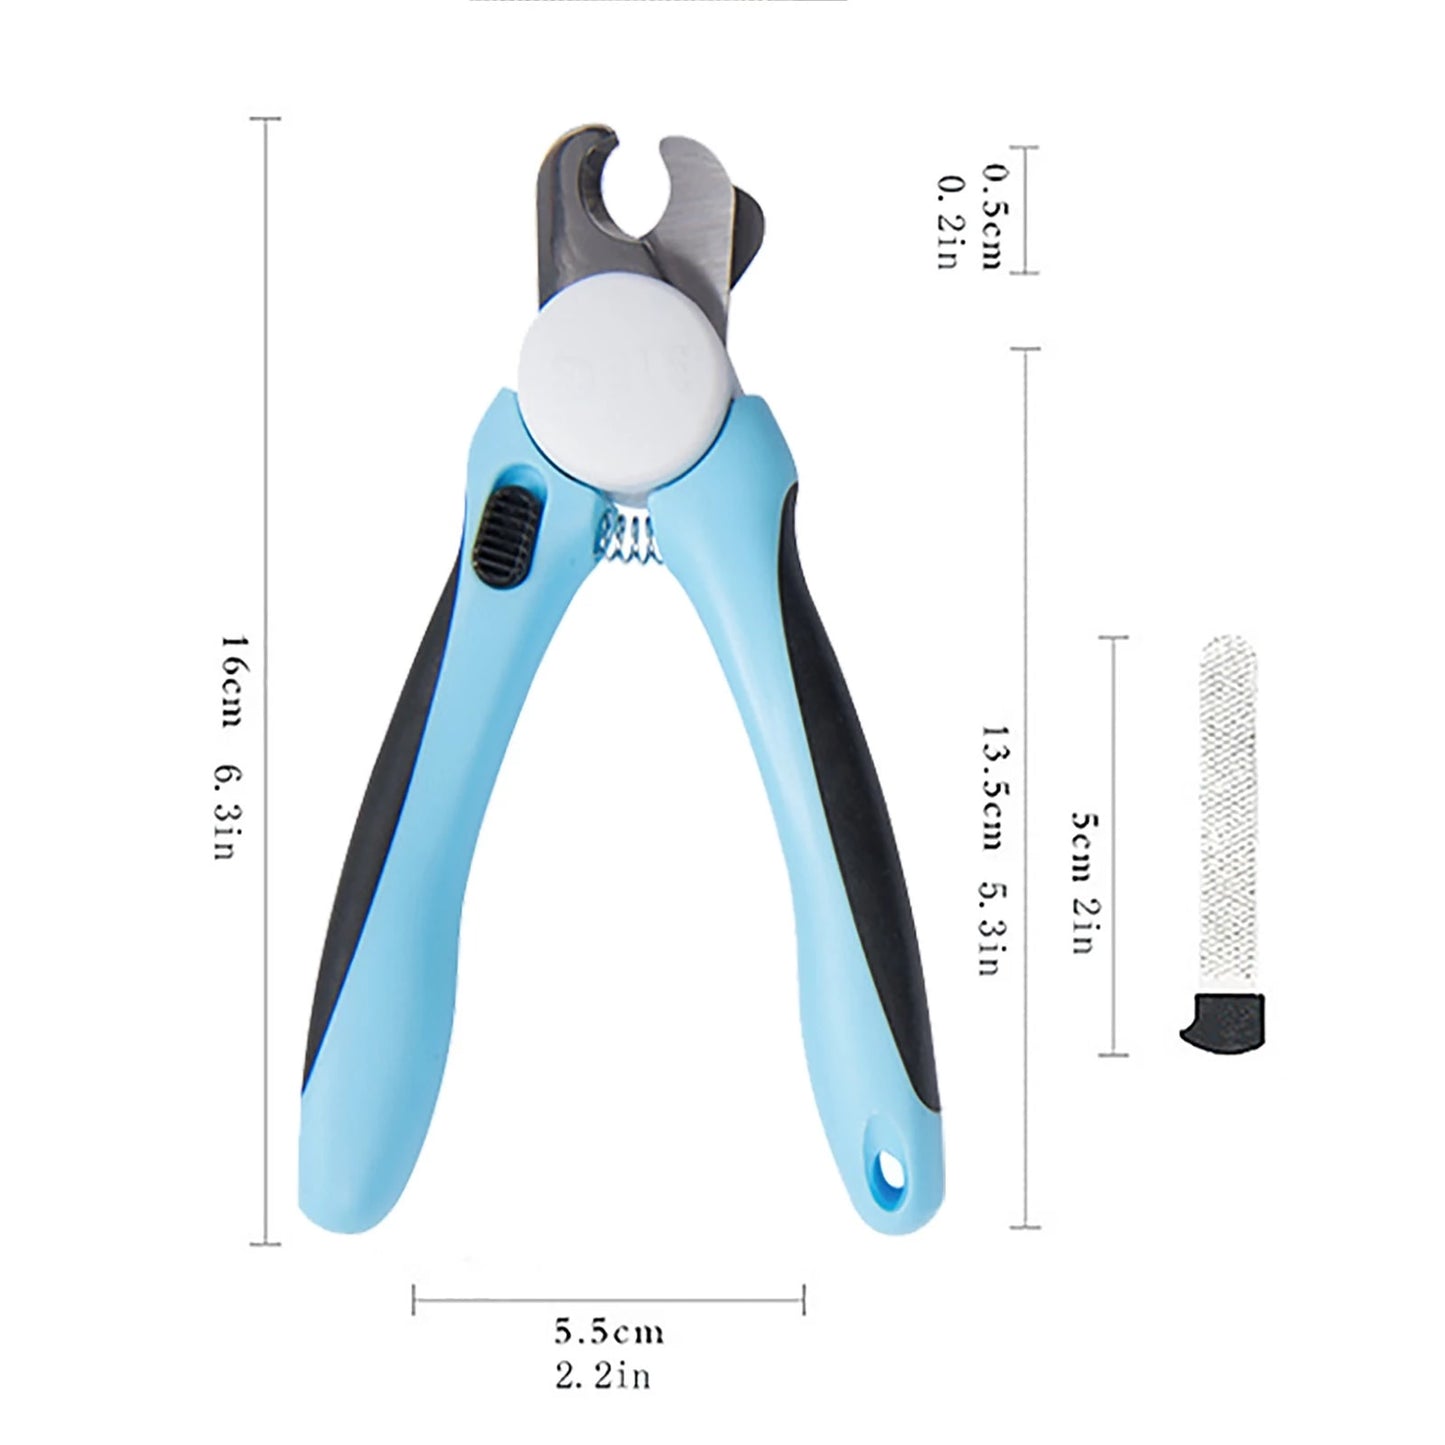 Dog Nail Clippers and Trimmer with Safety Guard to Avoid Over-Cutting Nail